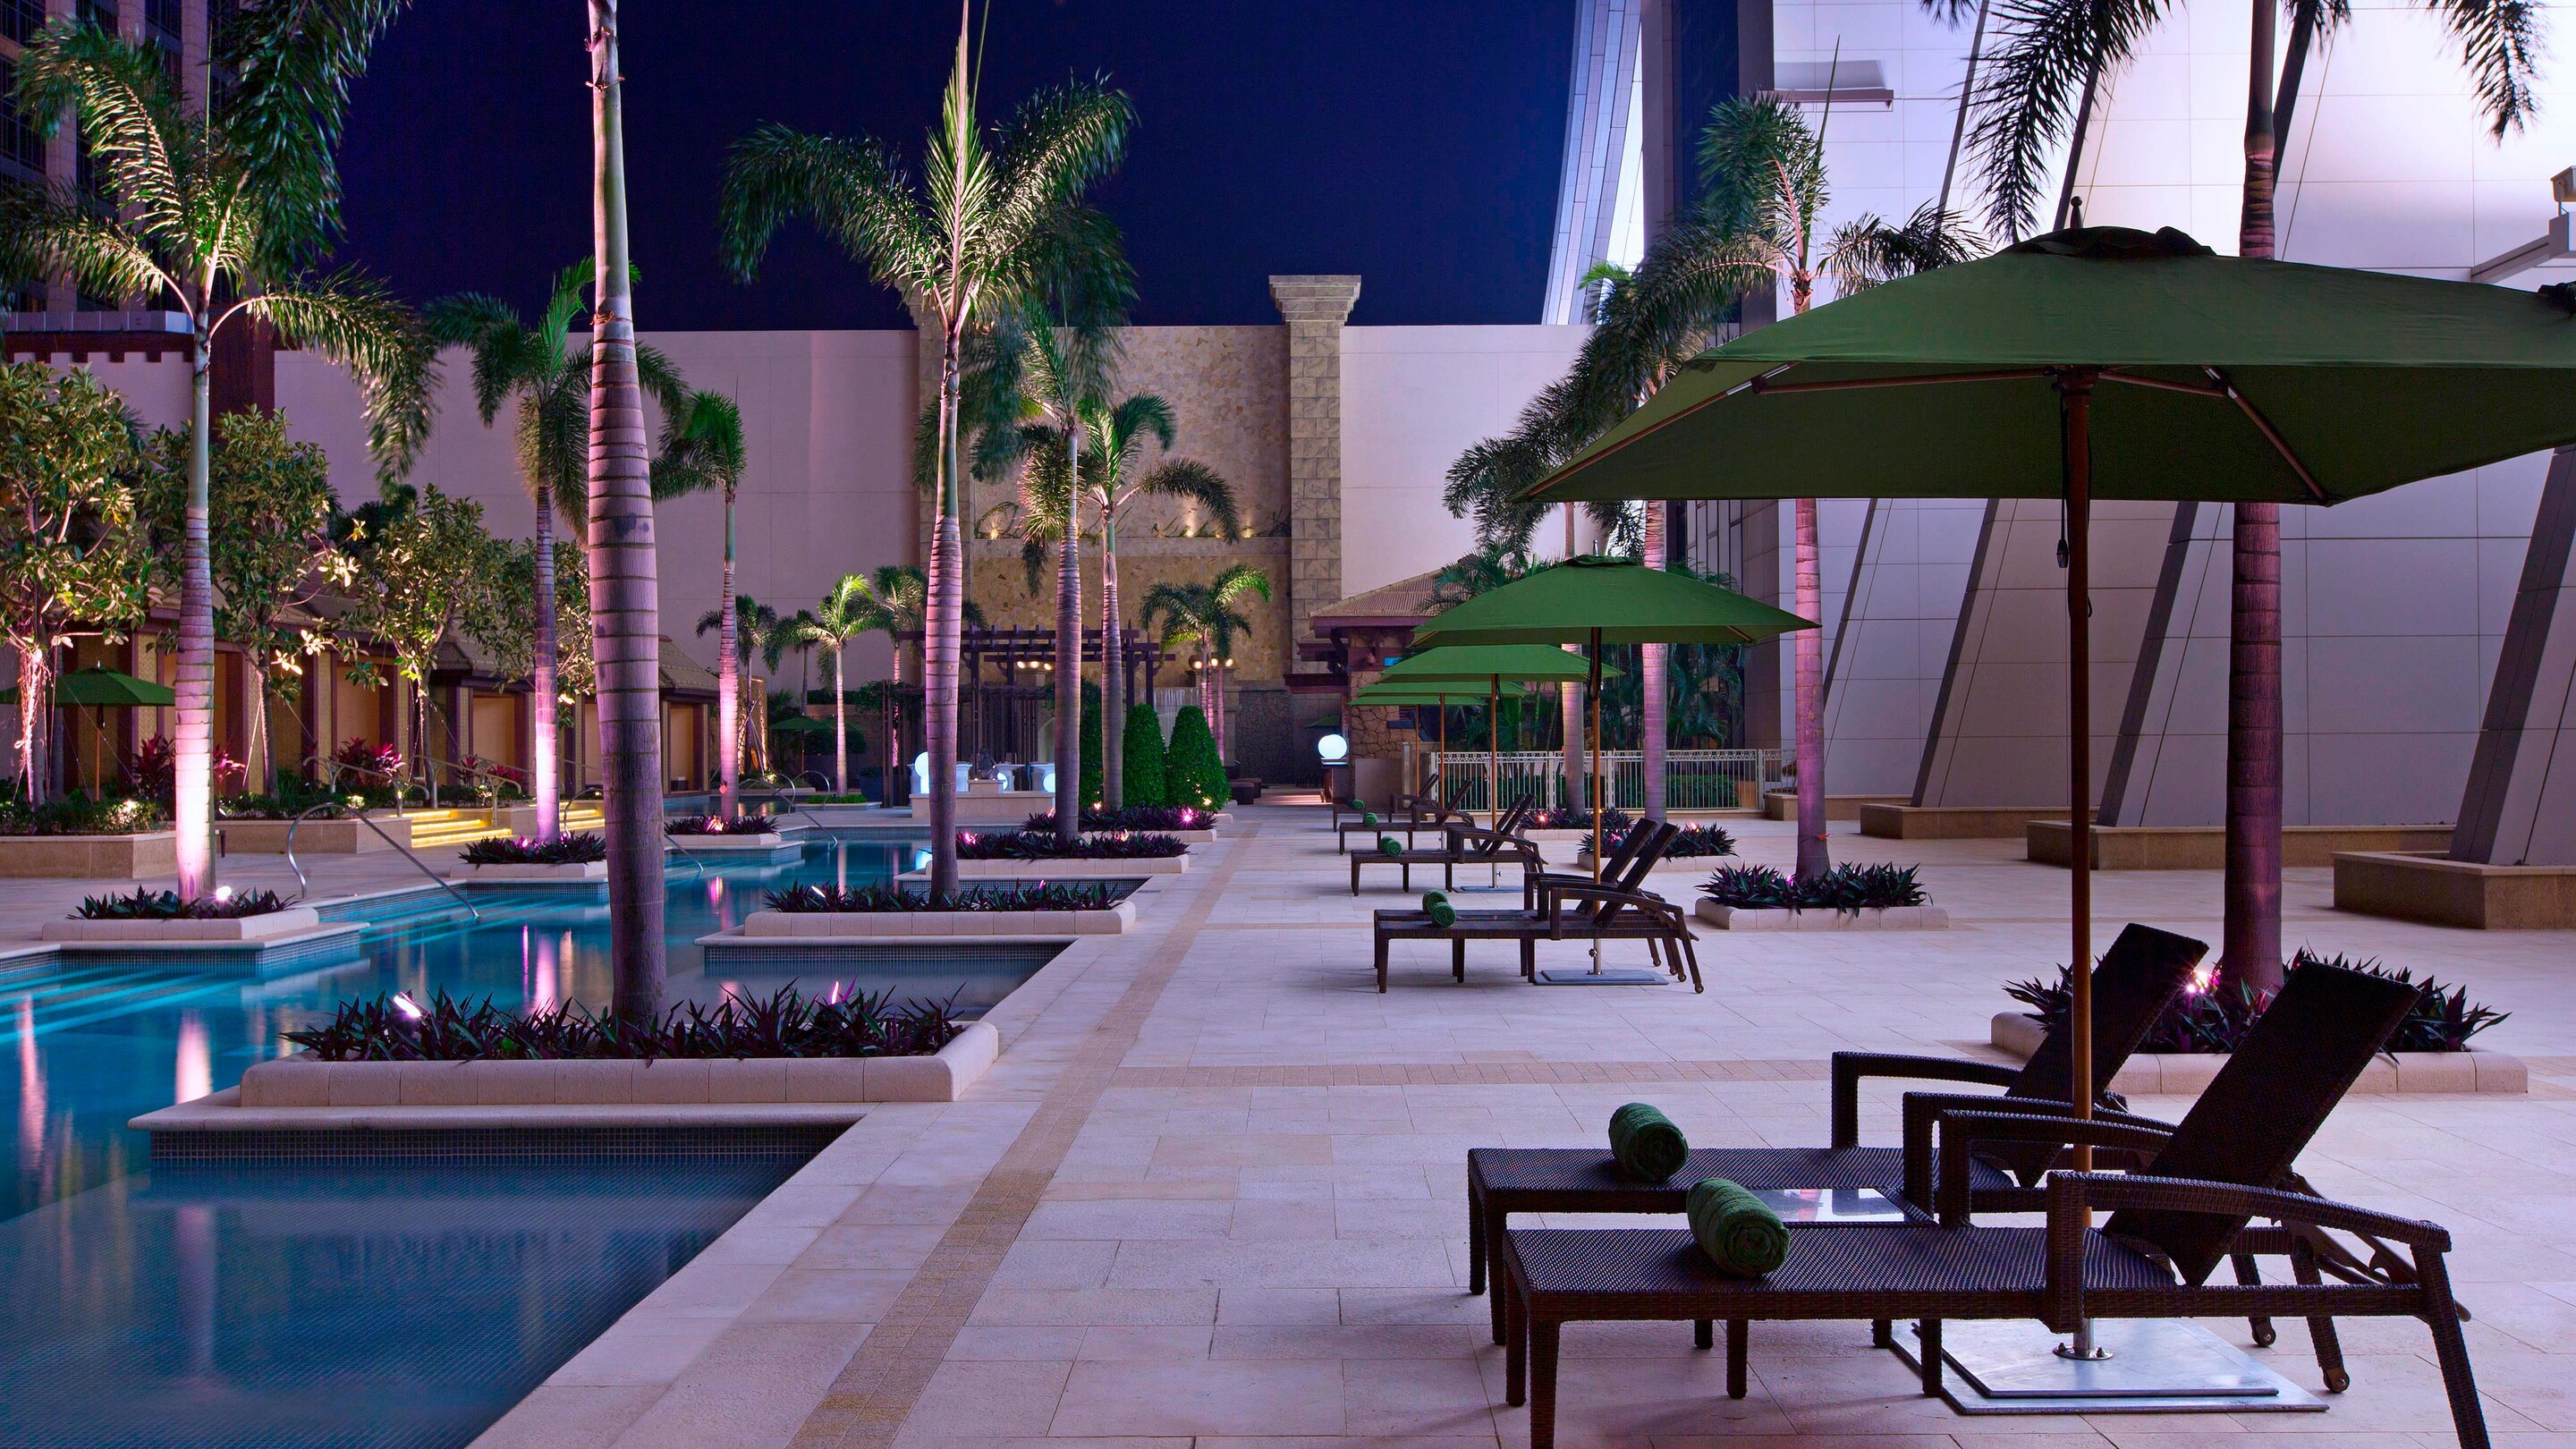 Poolside lounges in the evening next to lighted pool and palm trees